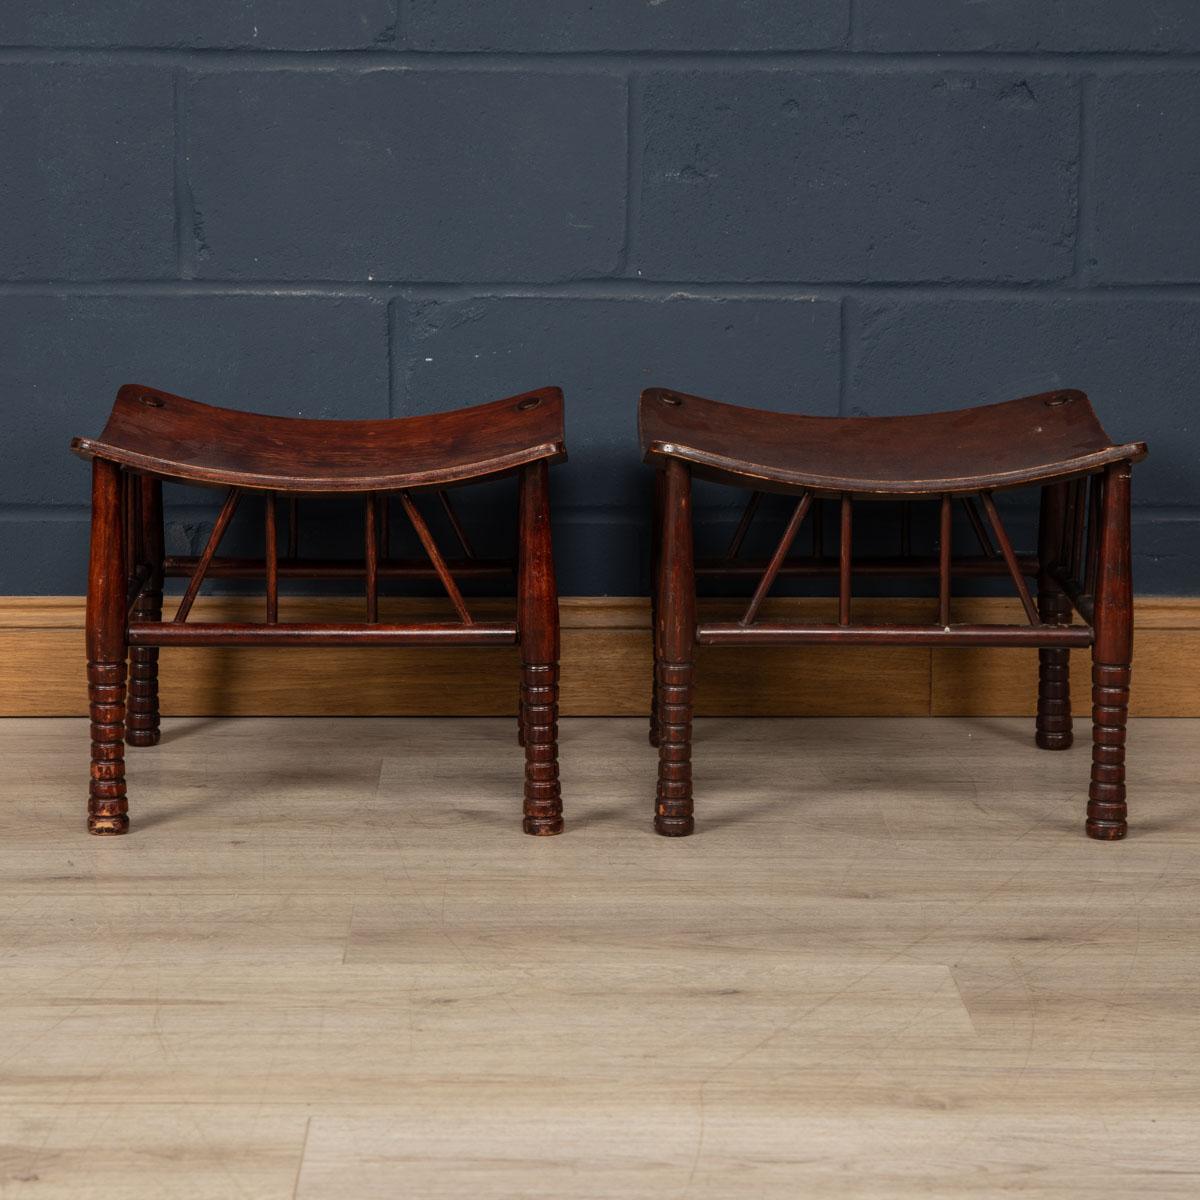 British 20th Century English Pair of Thebes Stools by Liberty & Co.